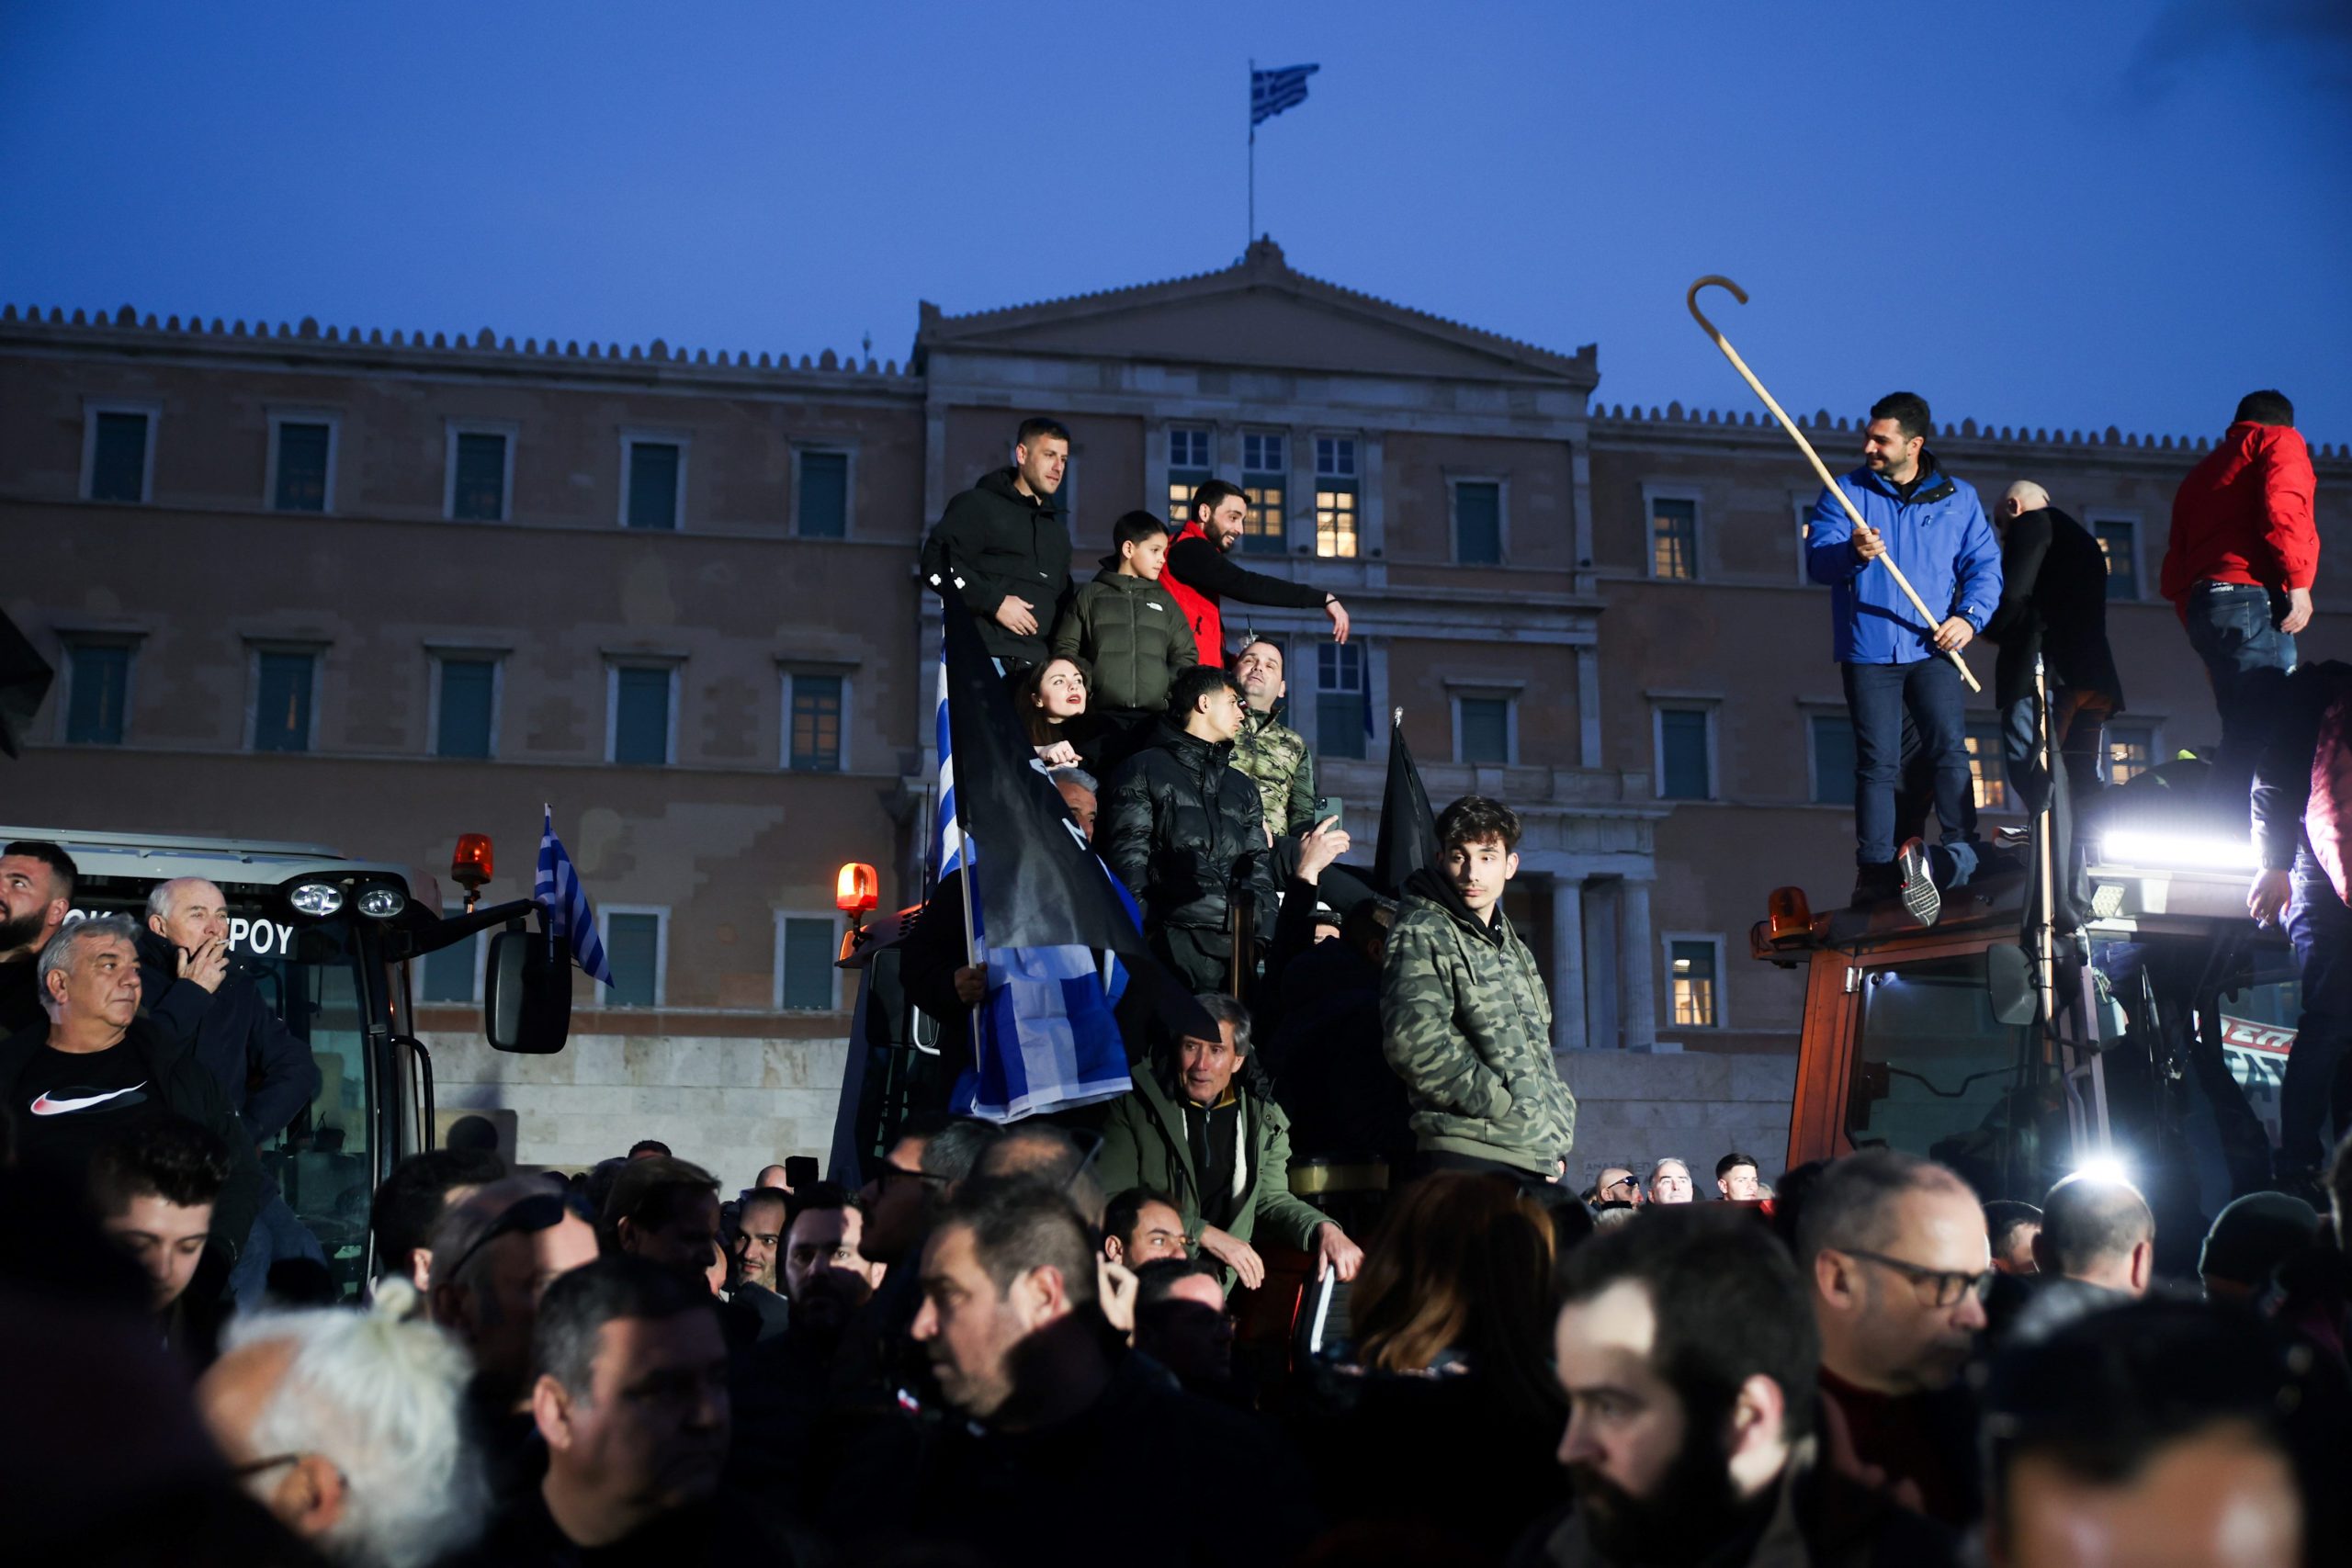 Farmers Rally Across From Greek Parliament Ends Without Incident